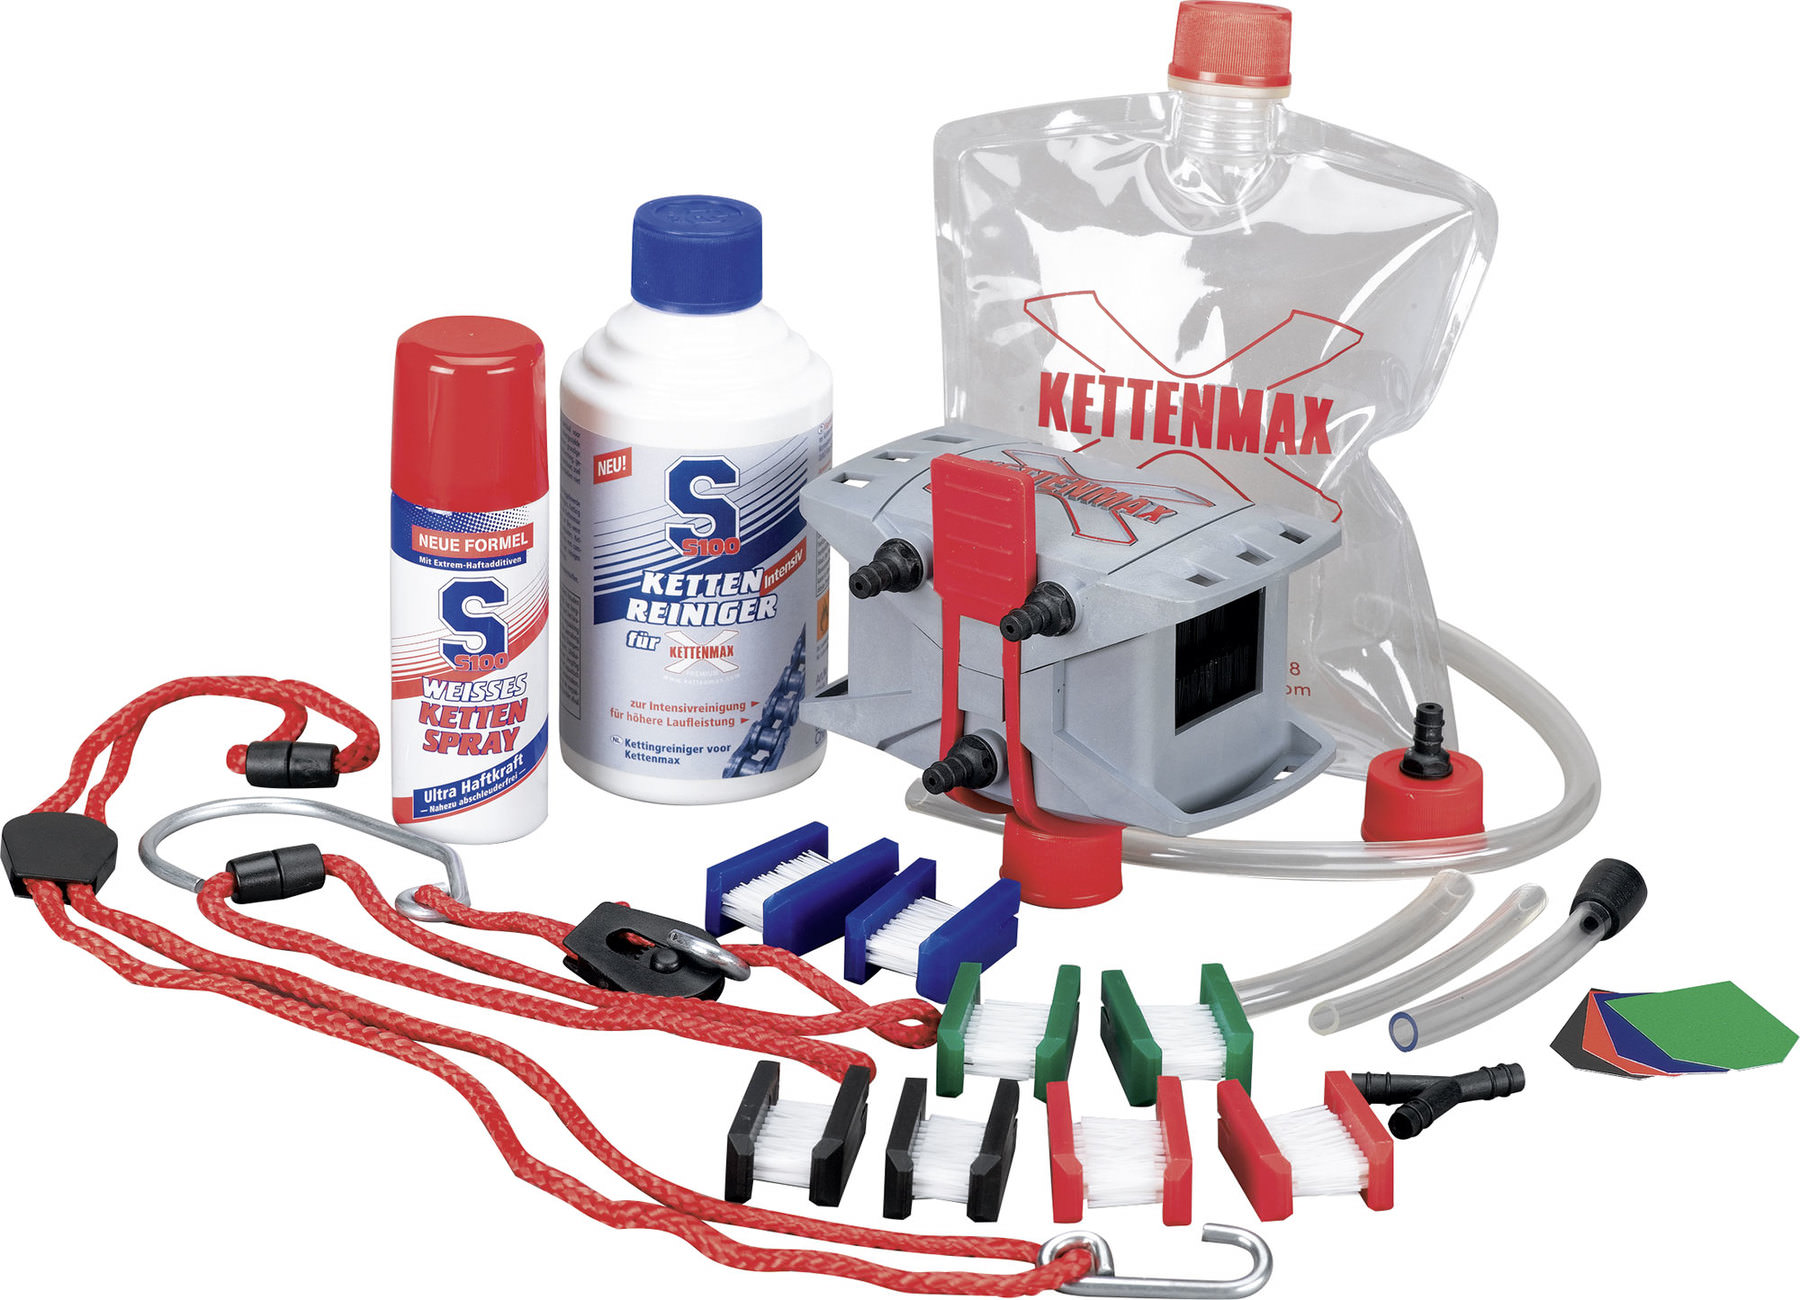 KETTENMAX Chain Cleaner Kit Set for Motorcycle Motorbike Chains Cleaning Machine 